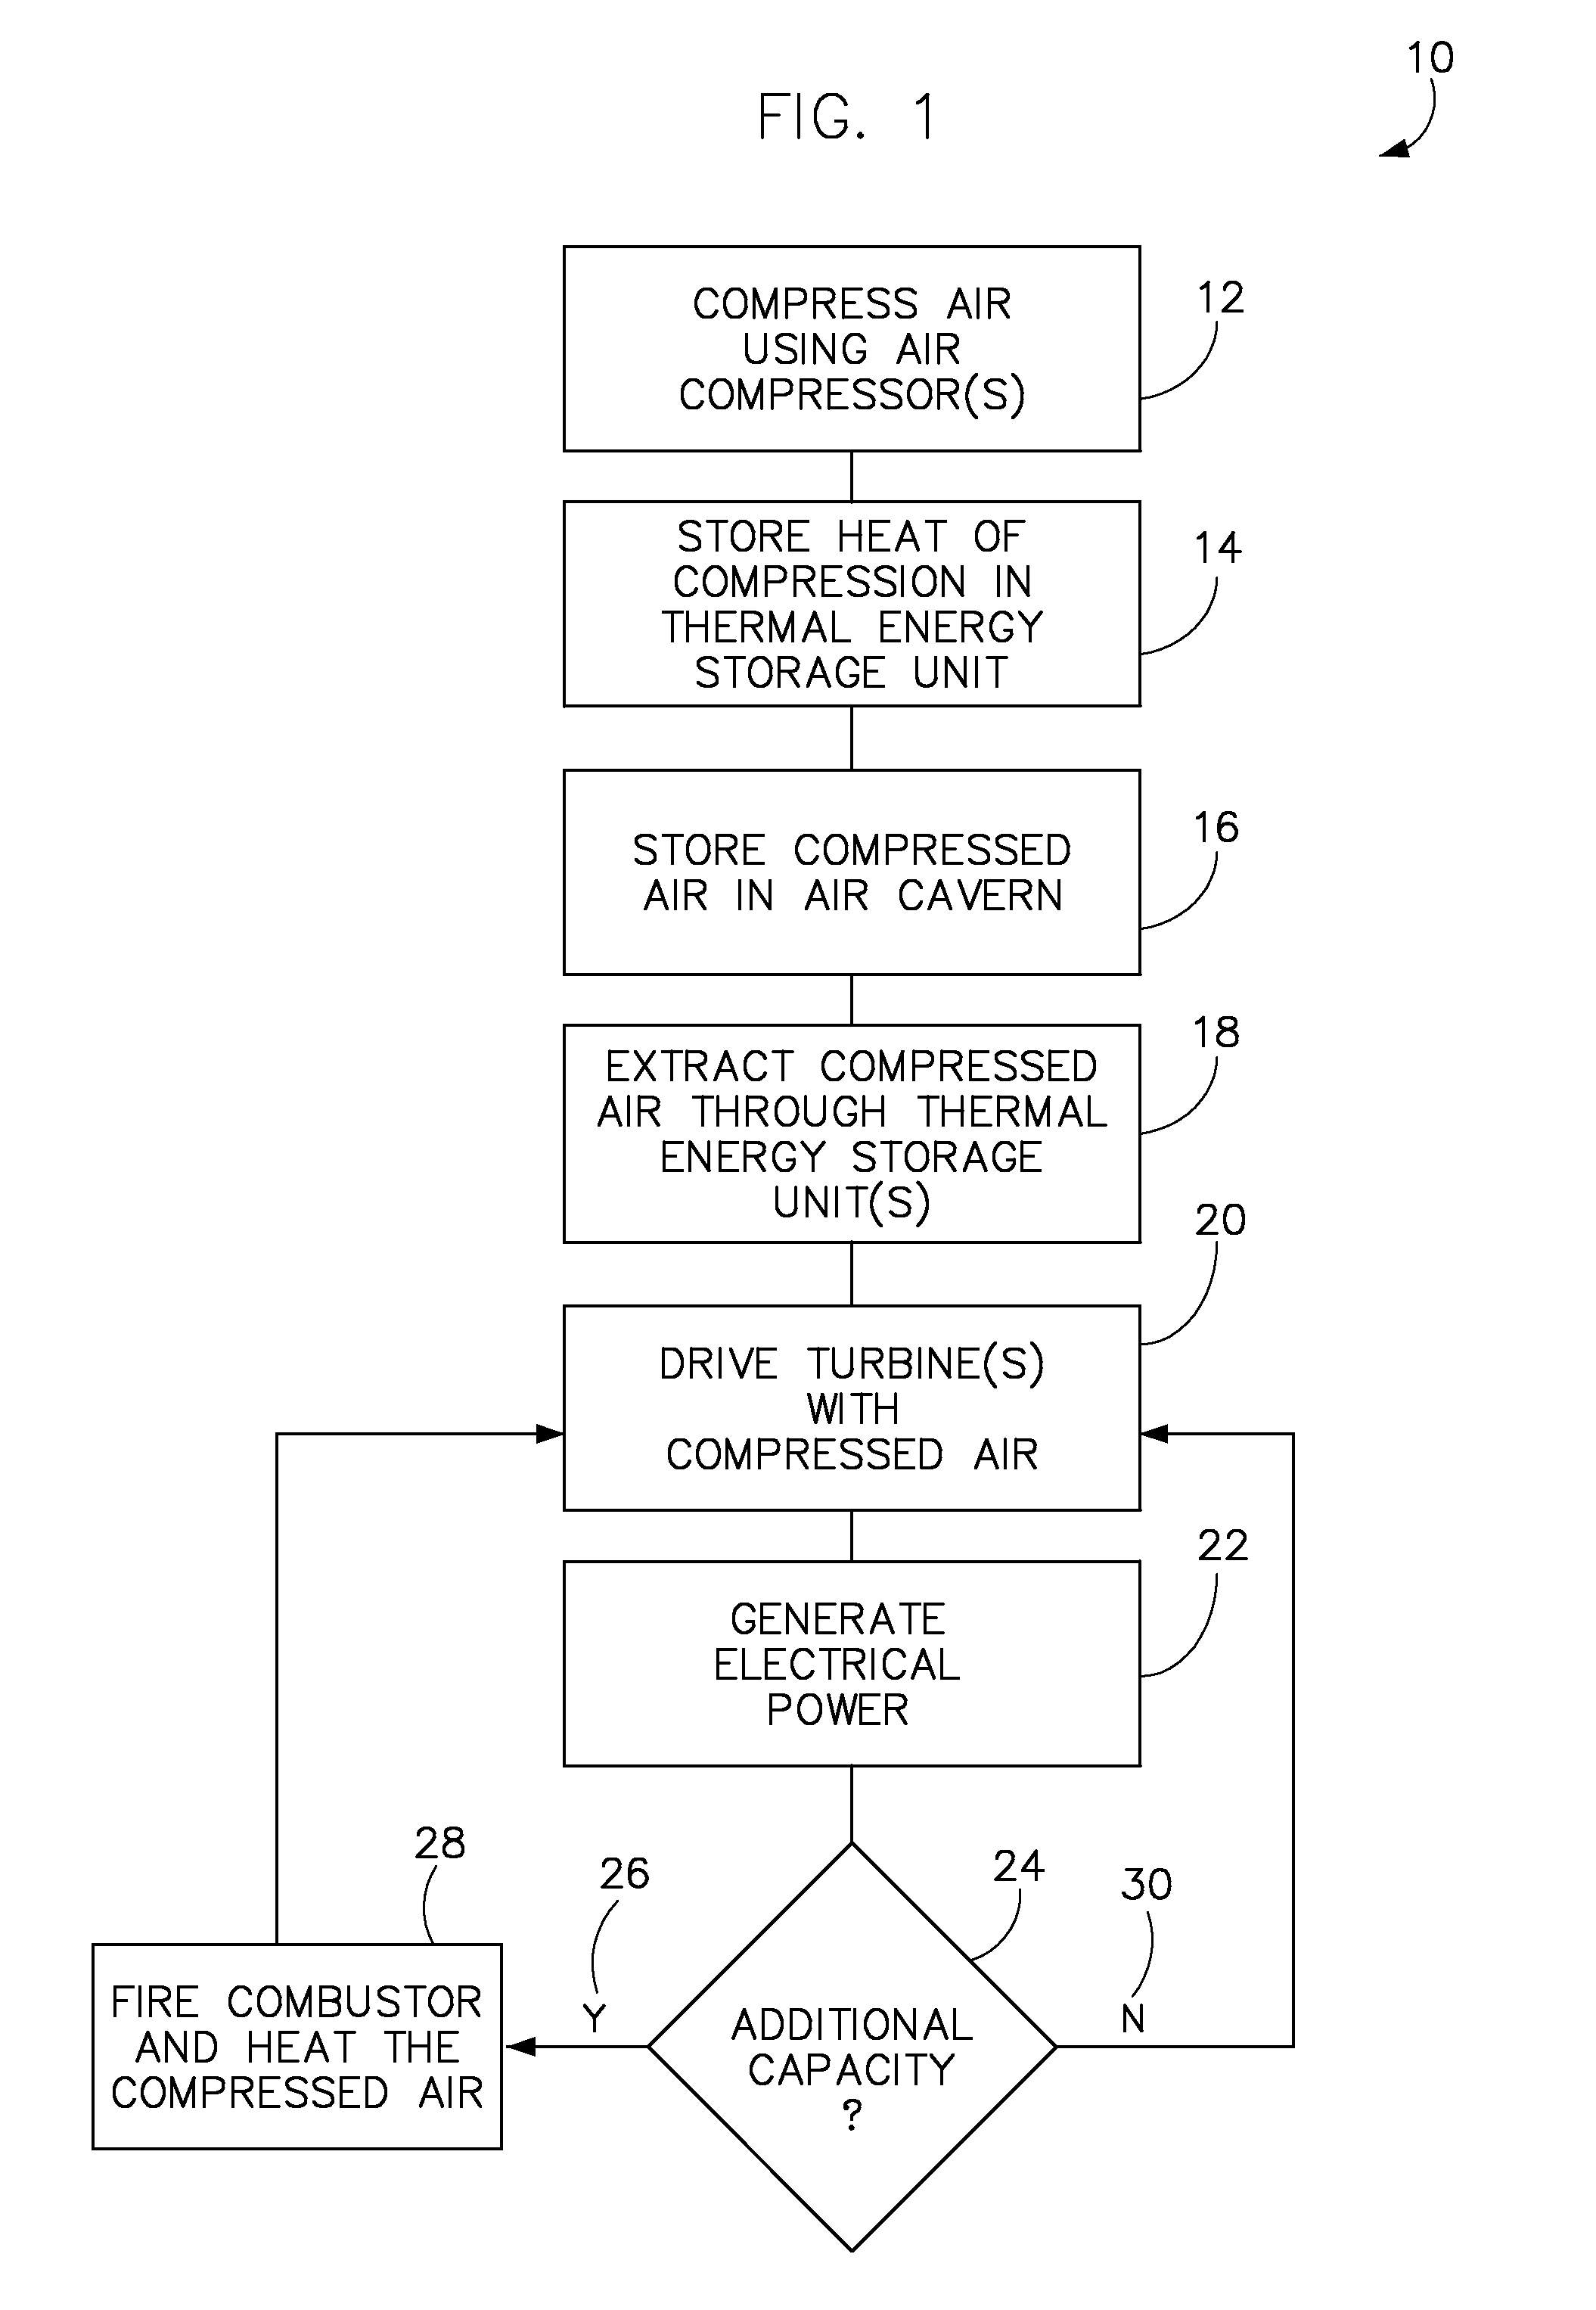 Adiabatic compressed air energy storage system with combustor